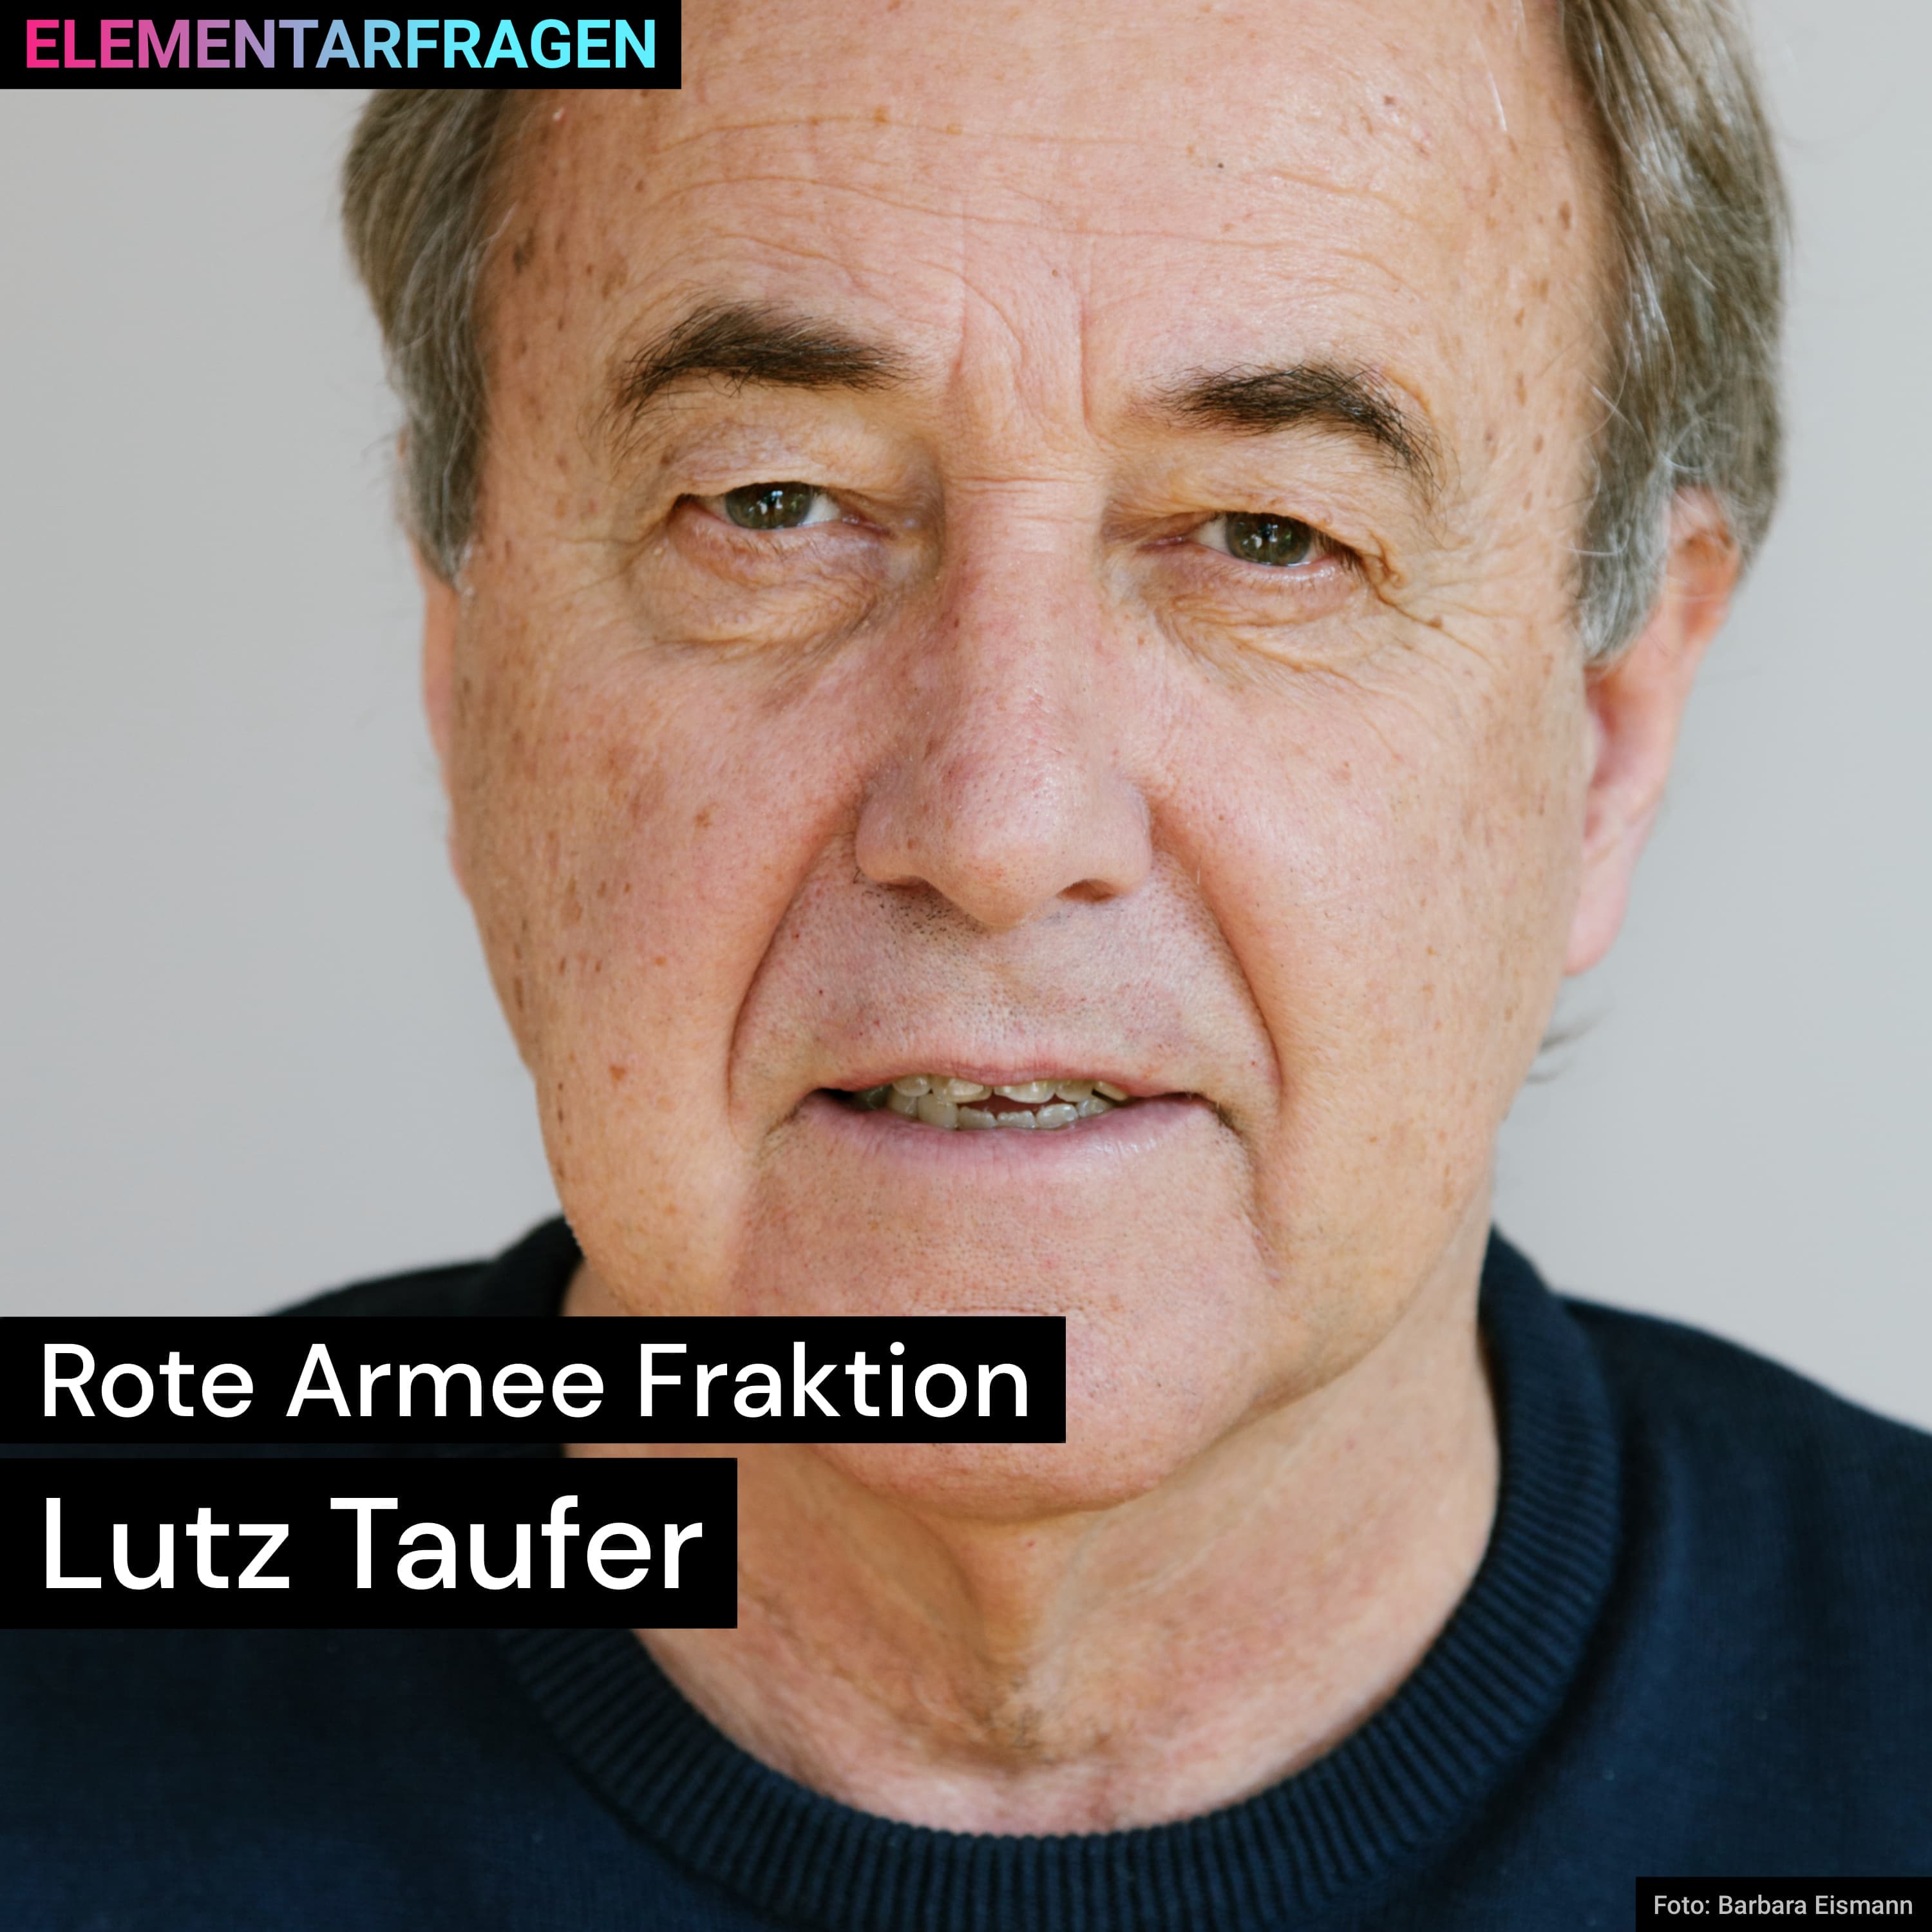 Rote Armee Fraktion | Lutz Taufer